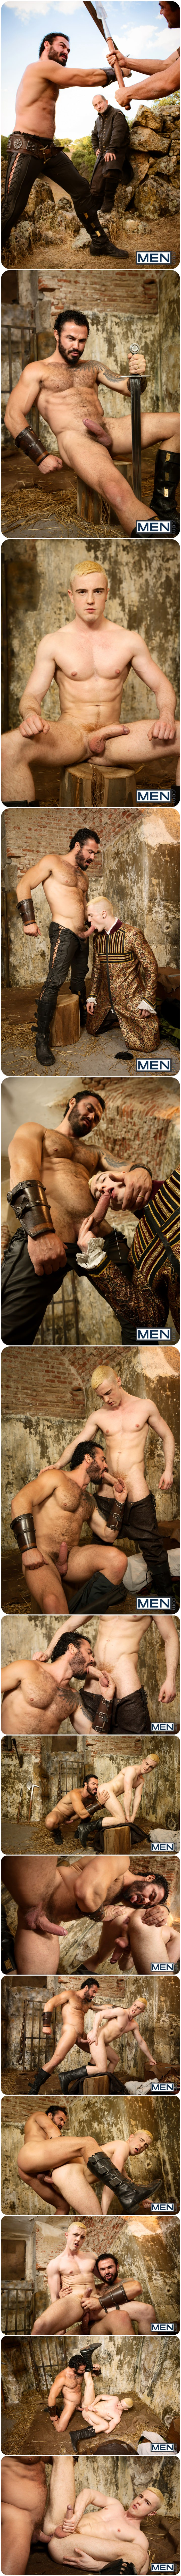 Men.com, Drill My Hole, Gay of Thrones, Jessy Ares JP Dubois